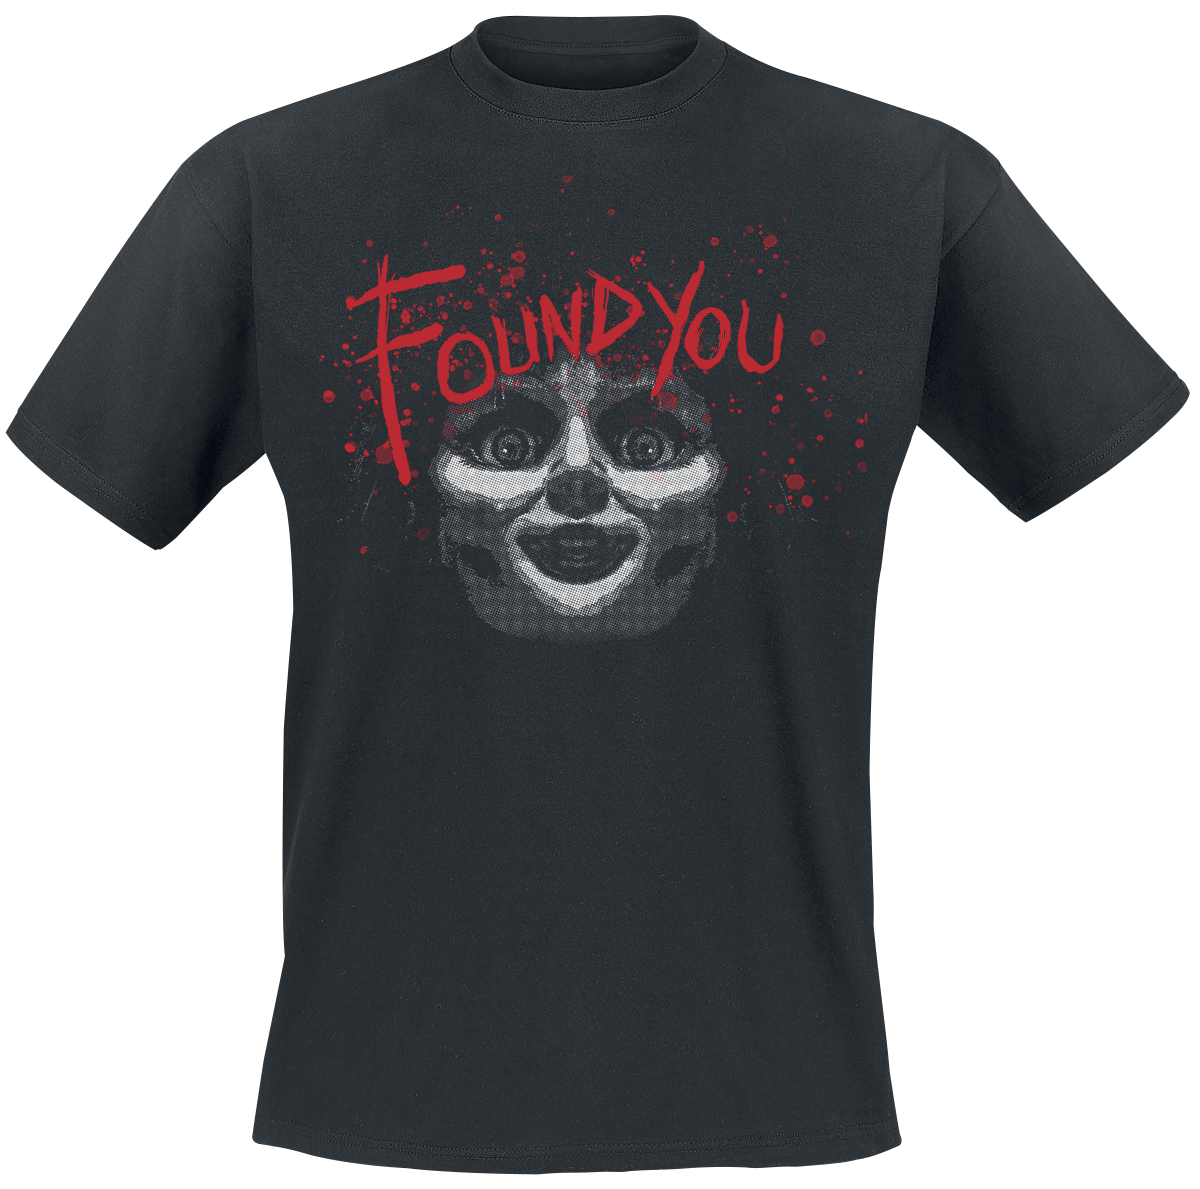 Annabelle - Found You - T-Shirt - black image